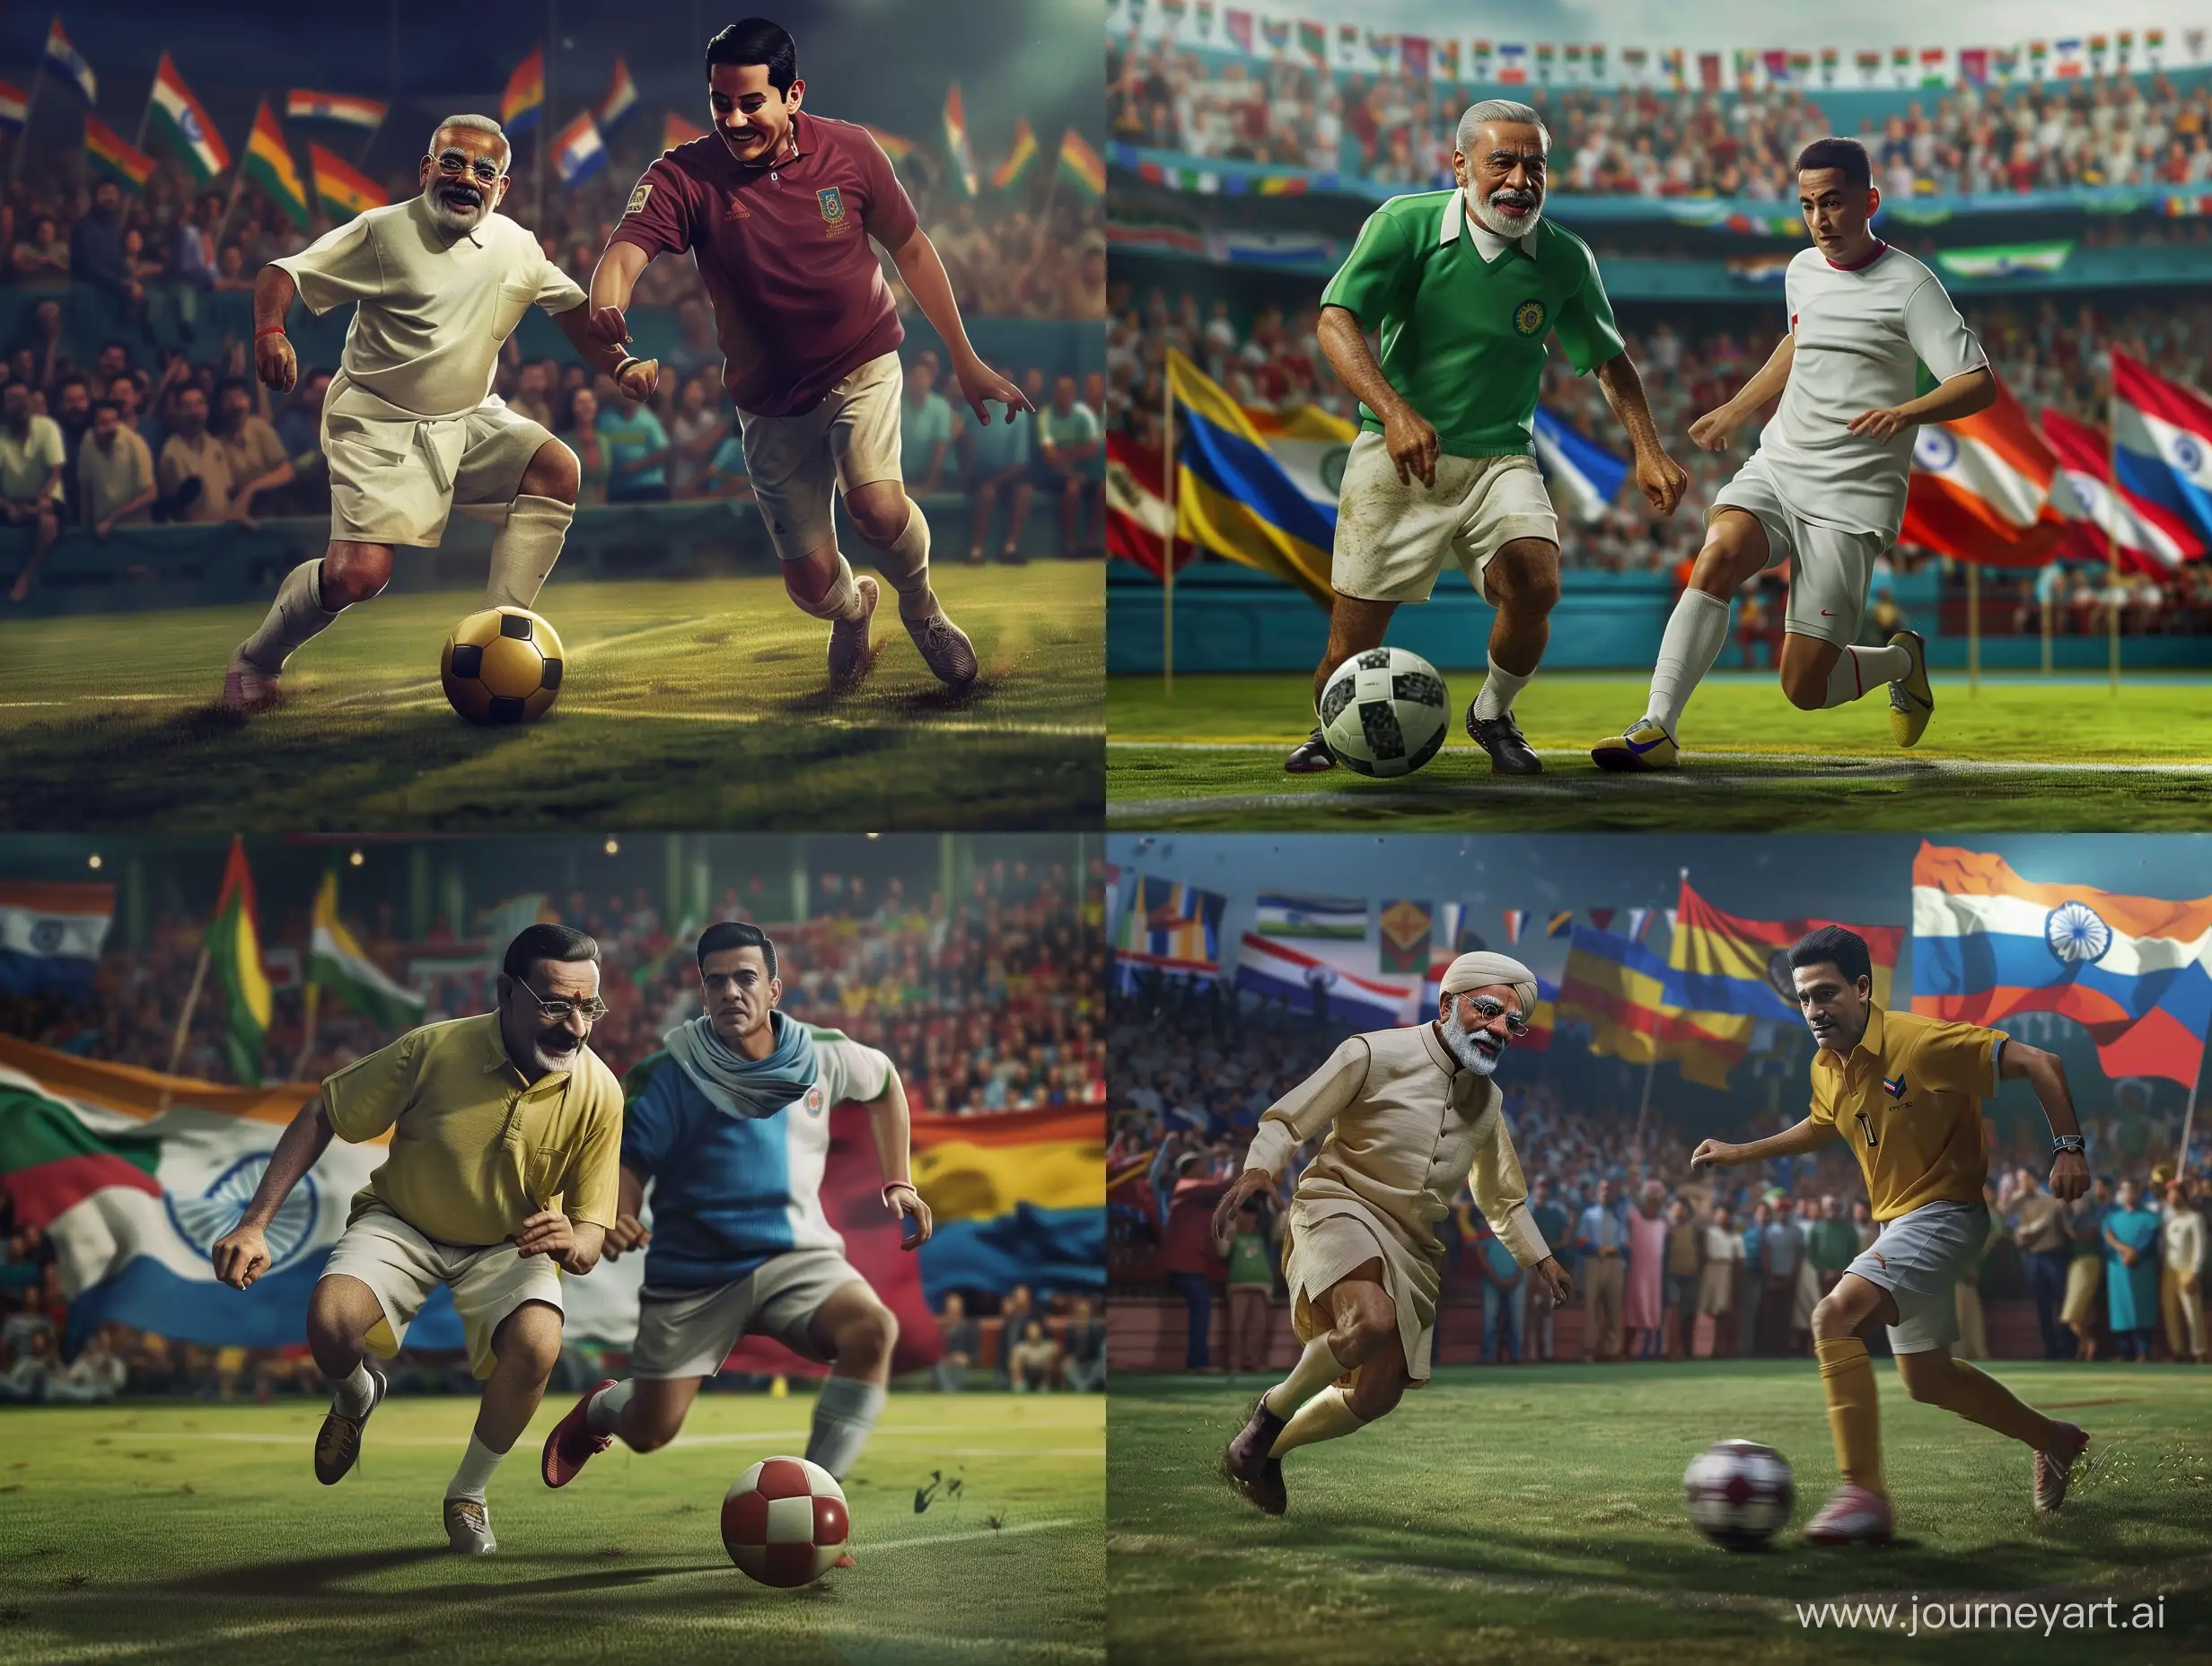 Gandhi playing football, Nicolas Maduro dribbling, on the football field, the whole body, Background of enthusiastic spectators with flags of India and Venezuela, At night, realistic, sport lighting, q2